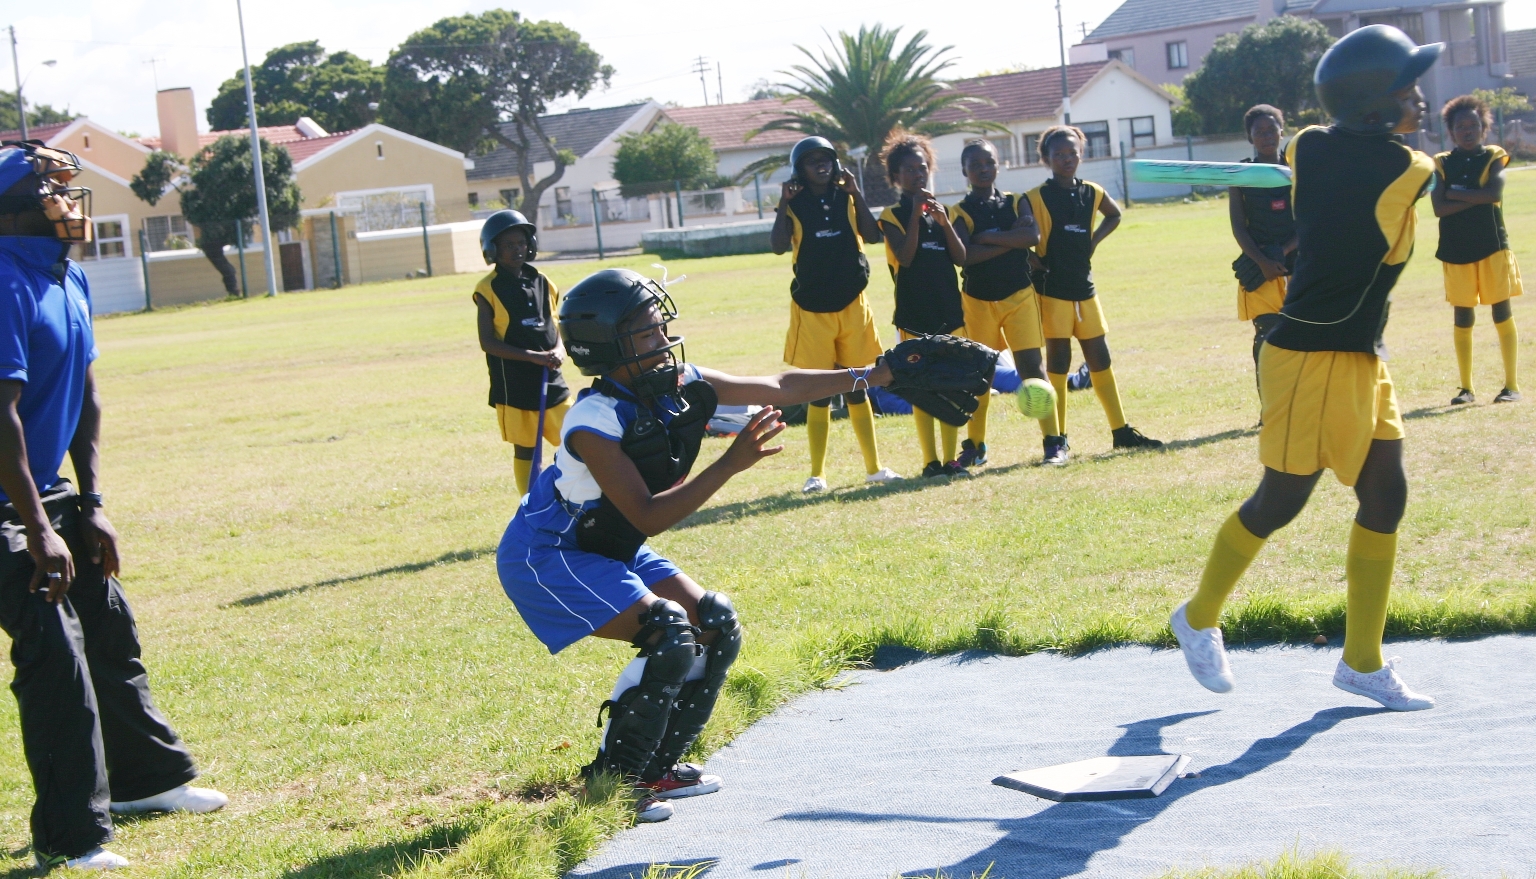 Swing and a miss for Masipumele Primary batter.